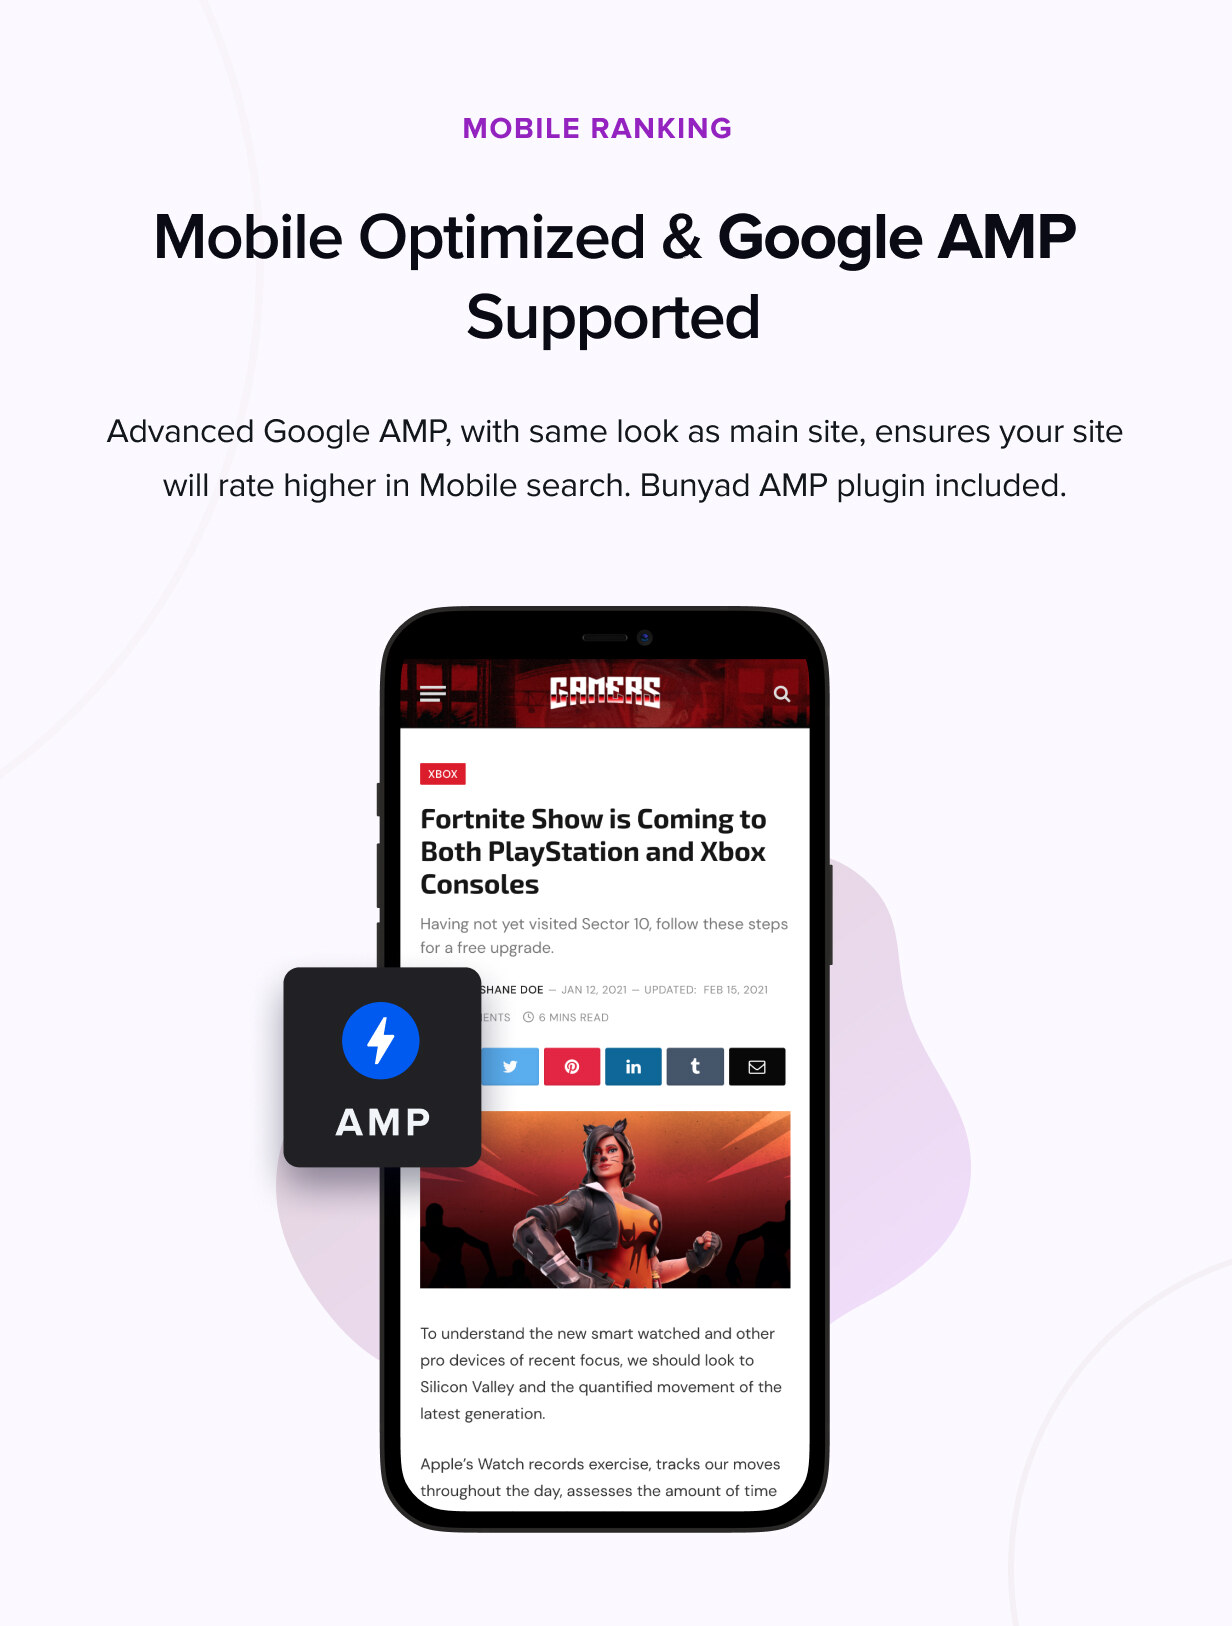 Mobile optimized and google AMP supported.